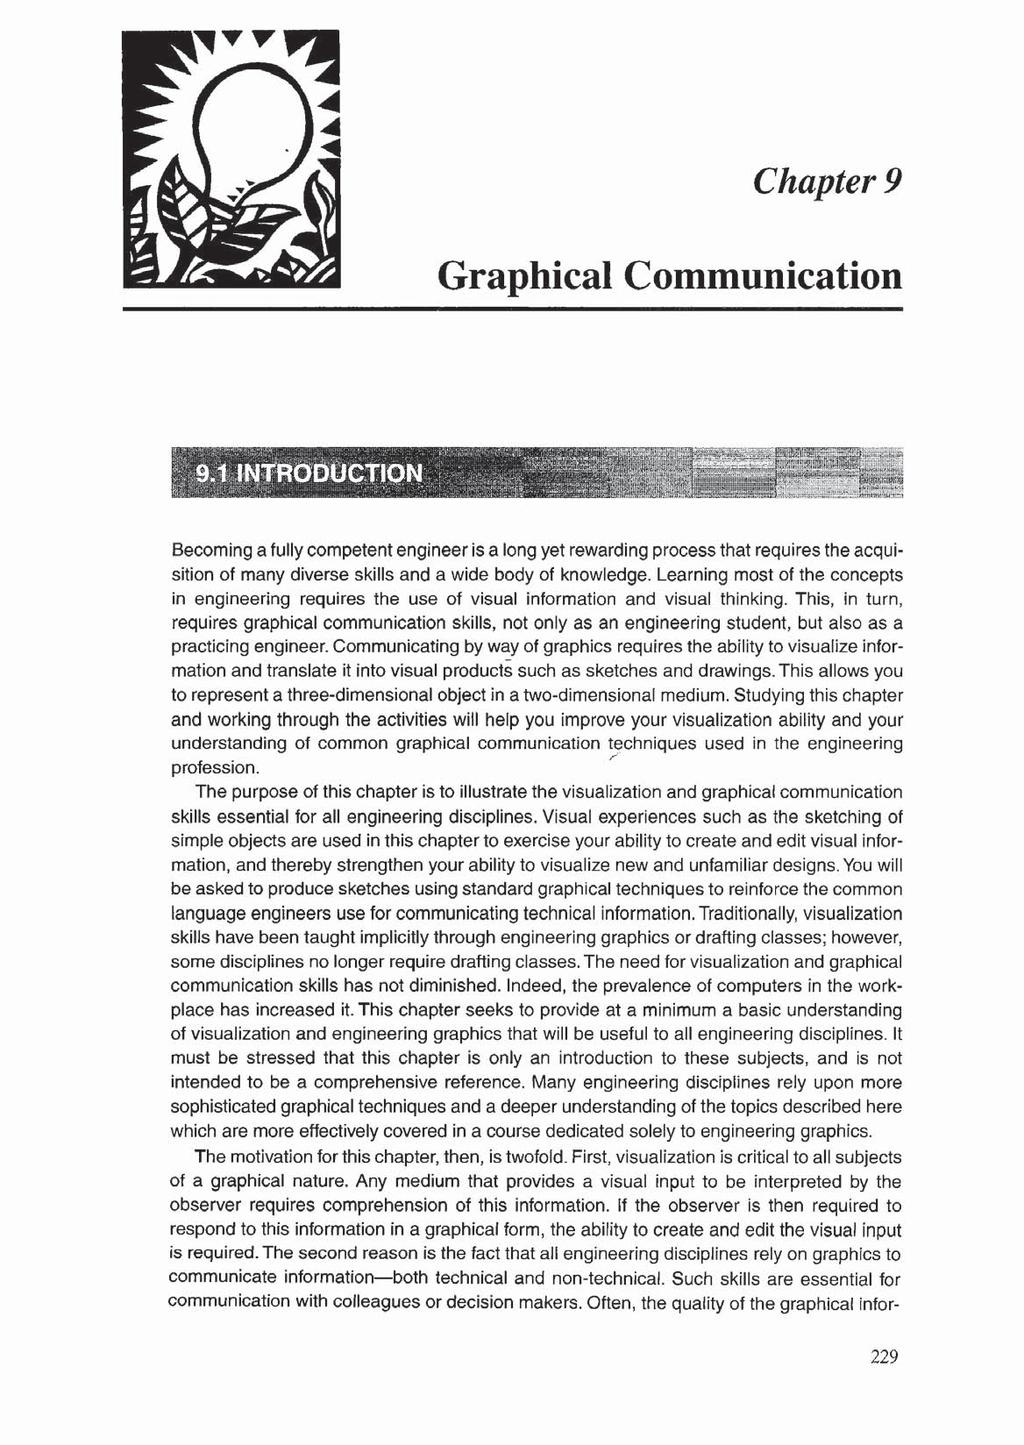 Chapter 9 Graphical Communication mmm Becoming a fully competent engineer is a long yet rewarding process that requires the acquisition of many diverse skills and a wide body of knowledge.